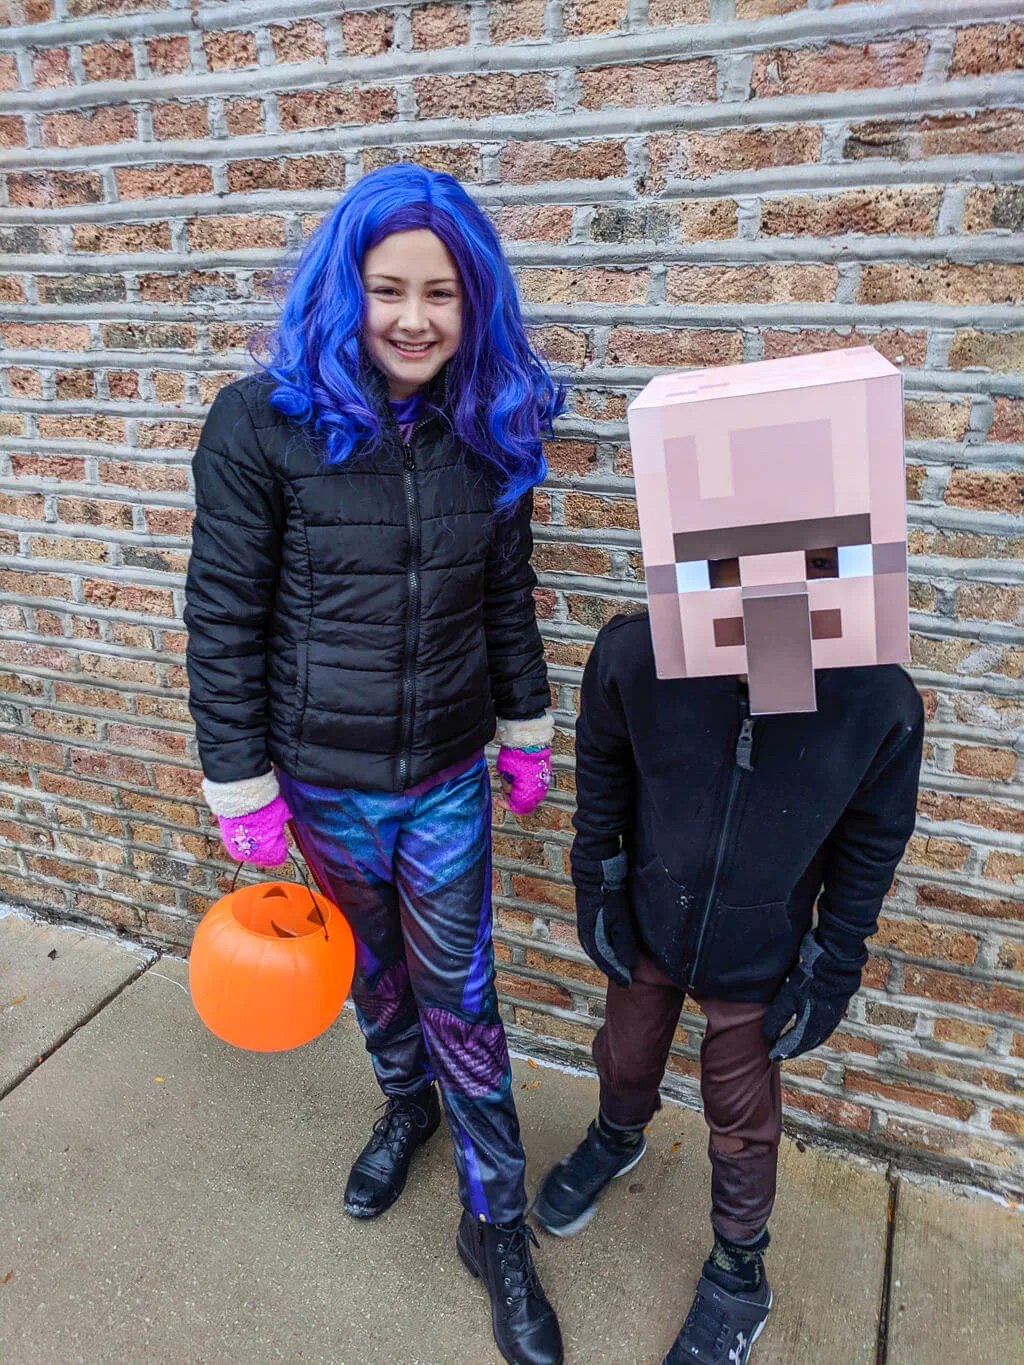 DIY Minecraft Villager costume with Mal from Descendants copyright Merriment Design Co. Written permission is needed to reuse this photo.